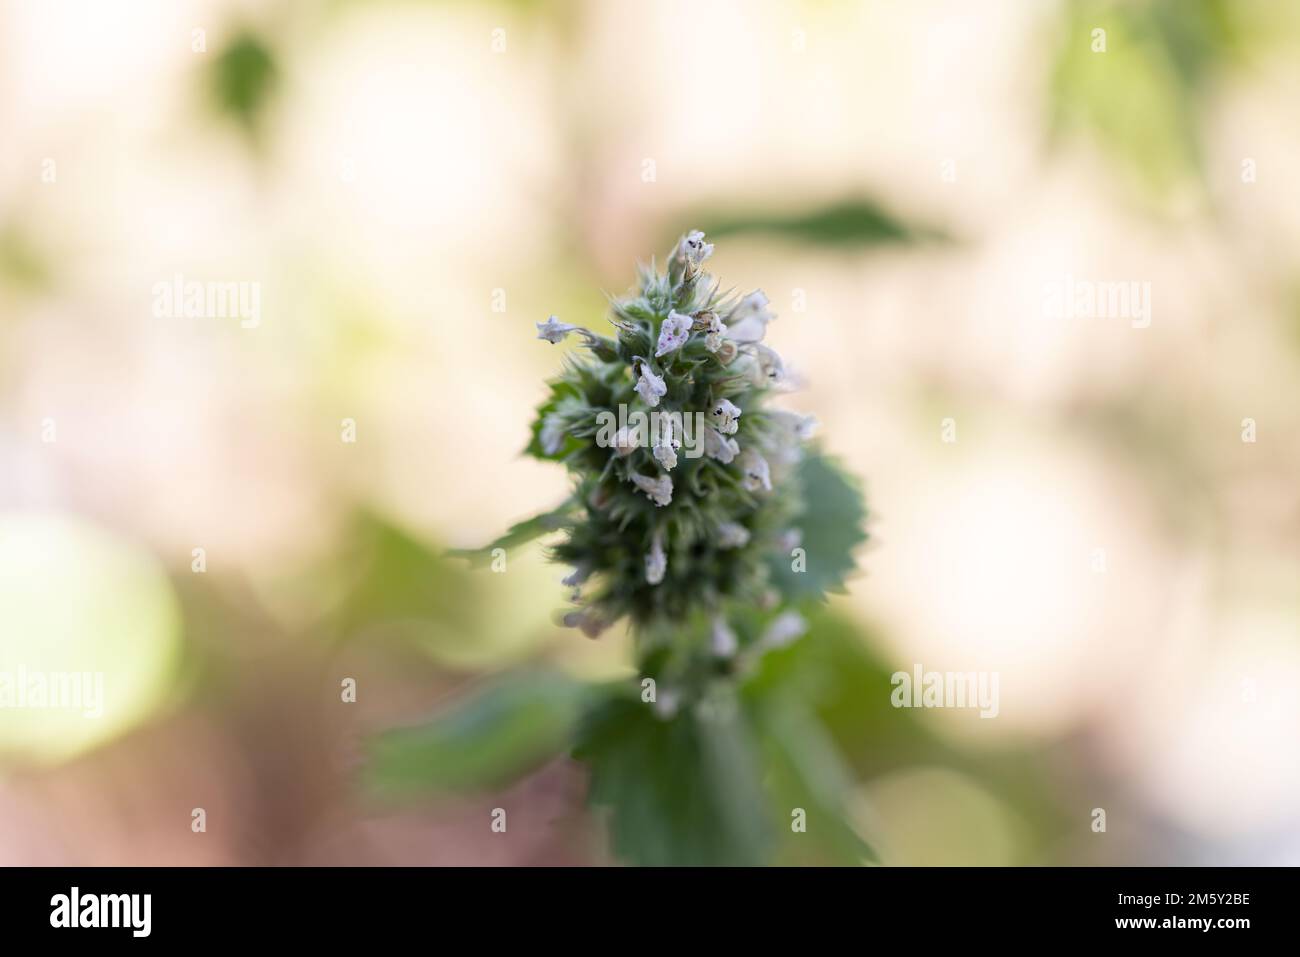 Catnip flowers up close with soft backgrounds. Stock Photo